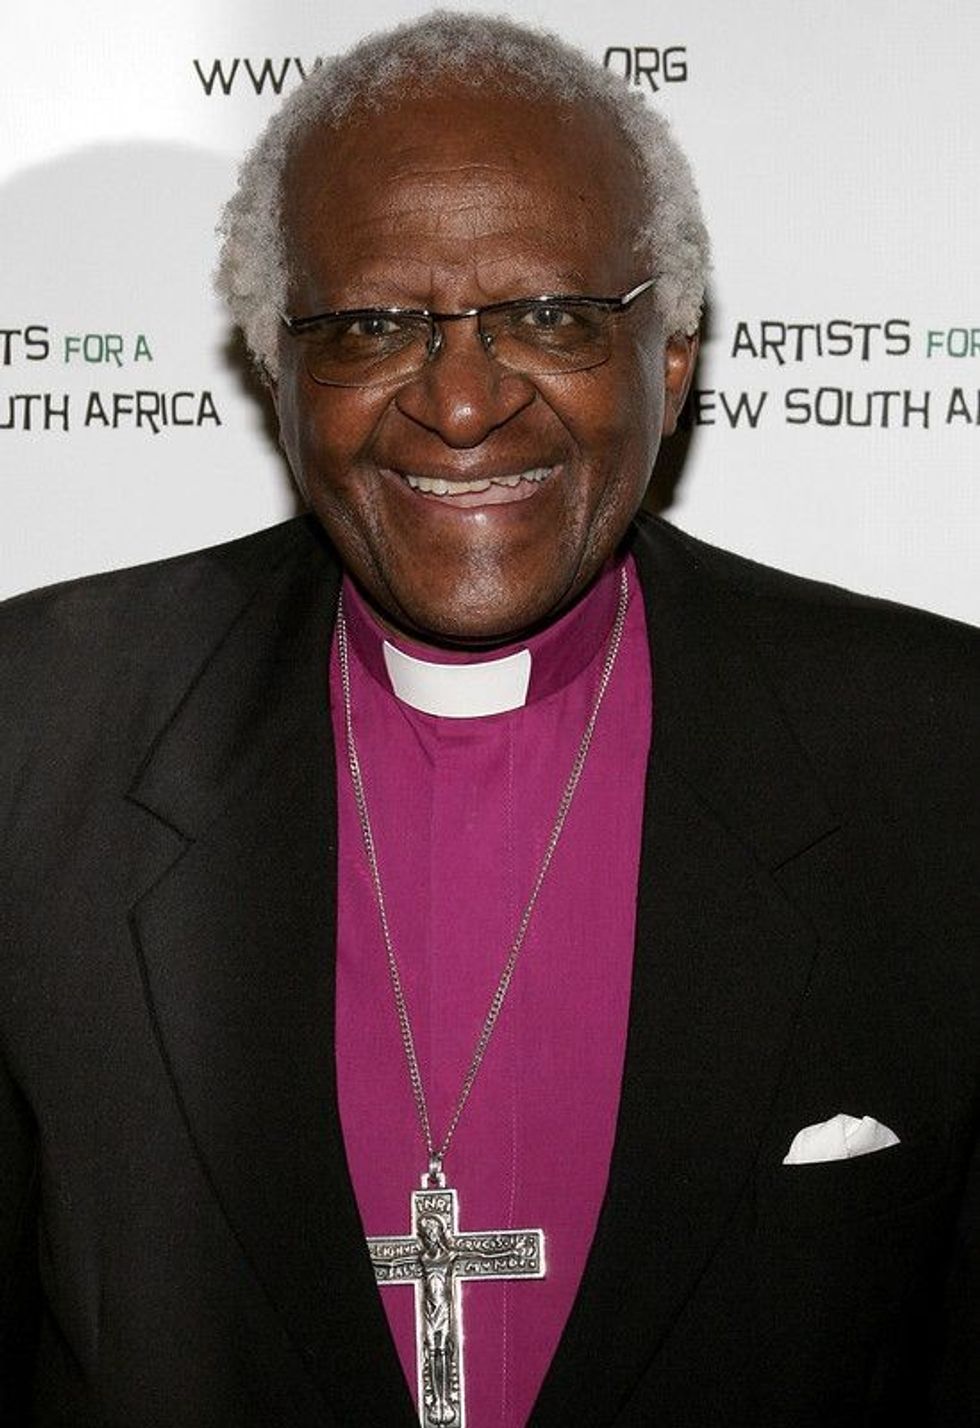 These Desmond Tutu quotes will motivate and inspire you to achieve greater things in life.